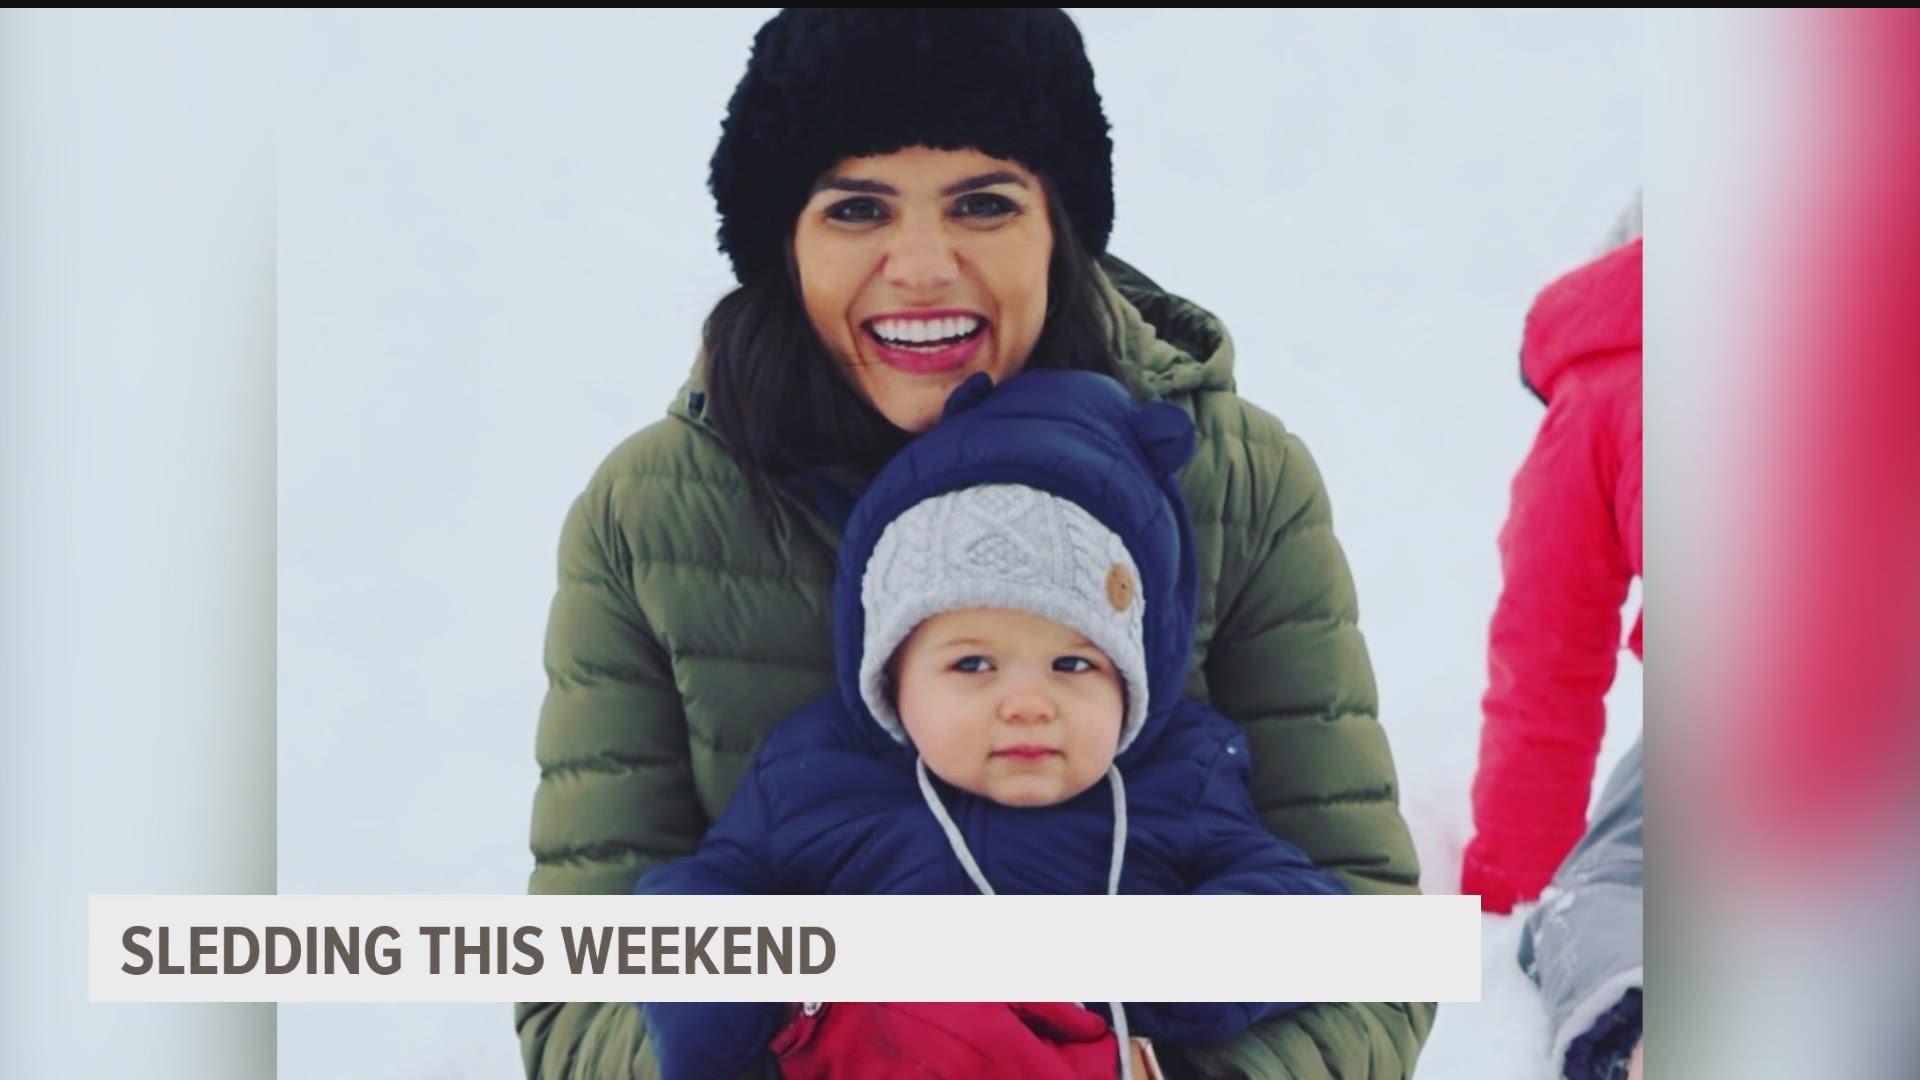 Good Morning Iowa anchor Sabrina Ahmed and executive producer Ryan Morris take their kiddos sledding on the first weekend of the new year!